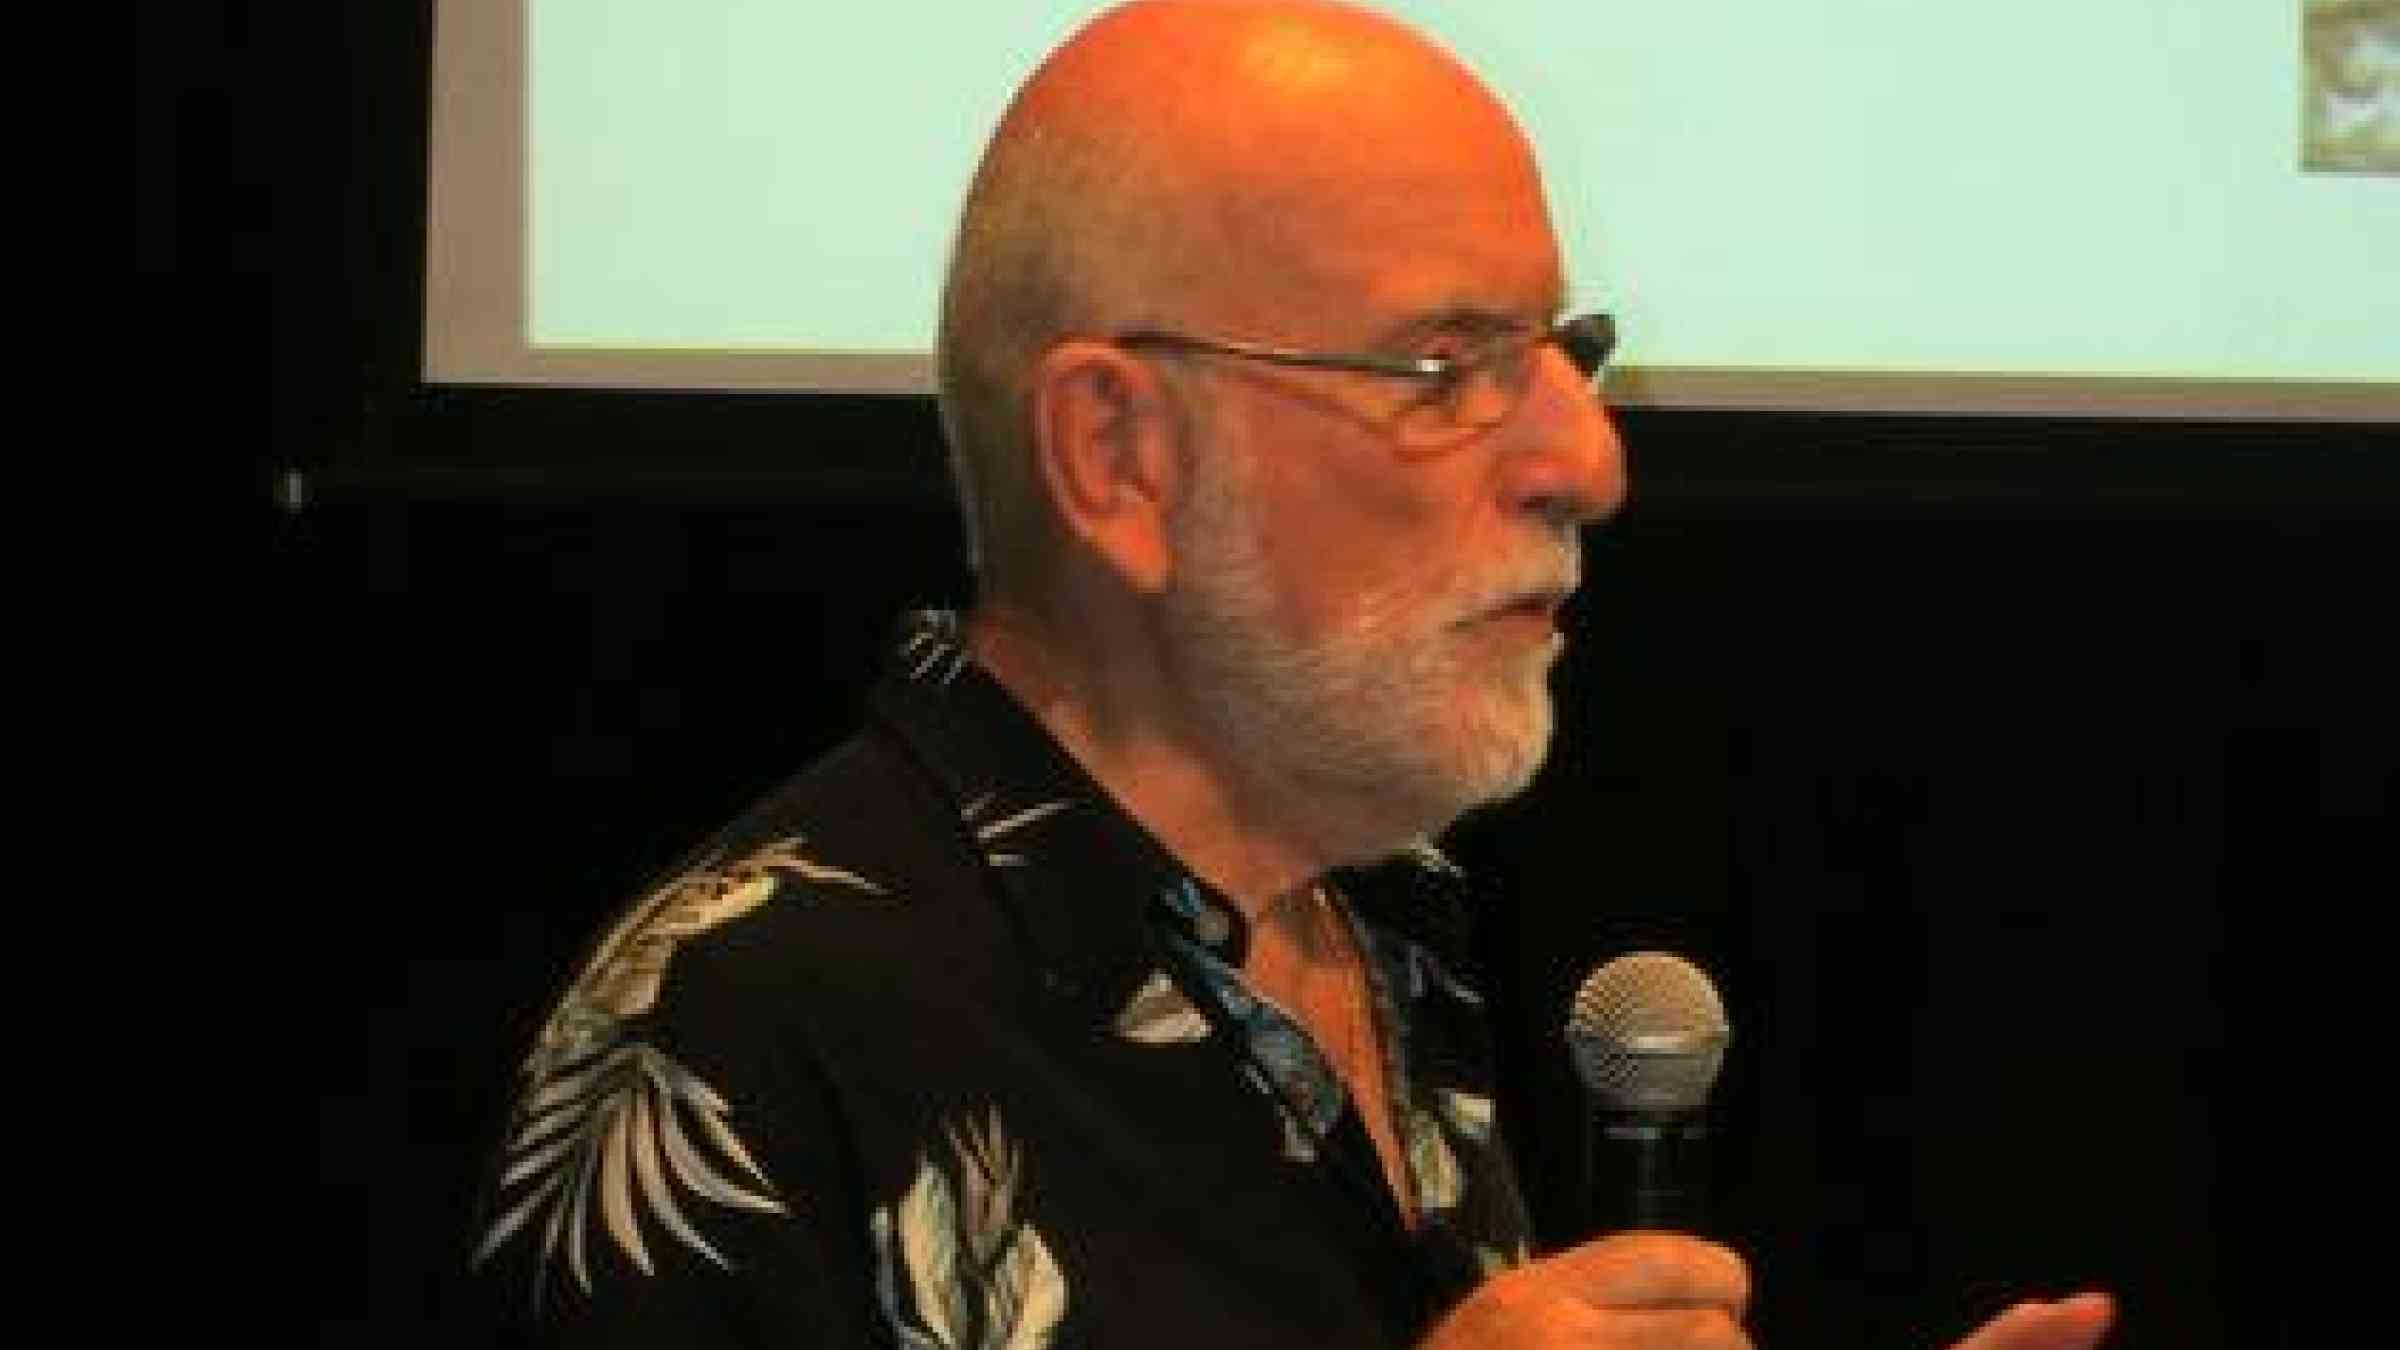 Build back better: Prof. John Hay tells the Pacific risk reduction and climate change conference in Fiji that regional organisations should increase their focus on recovery.